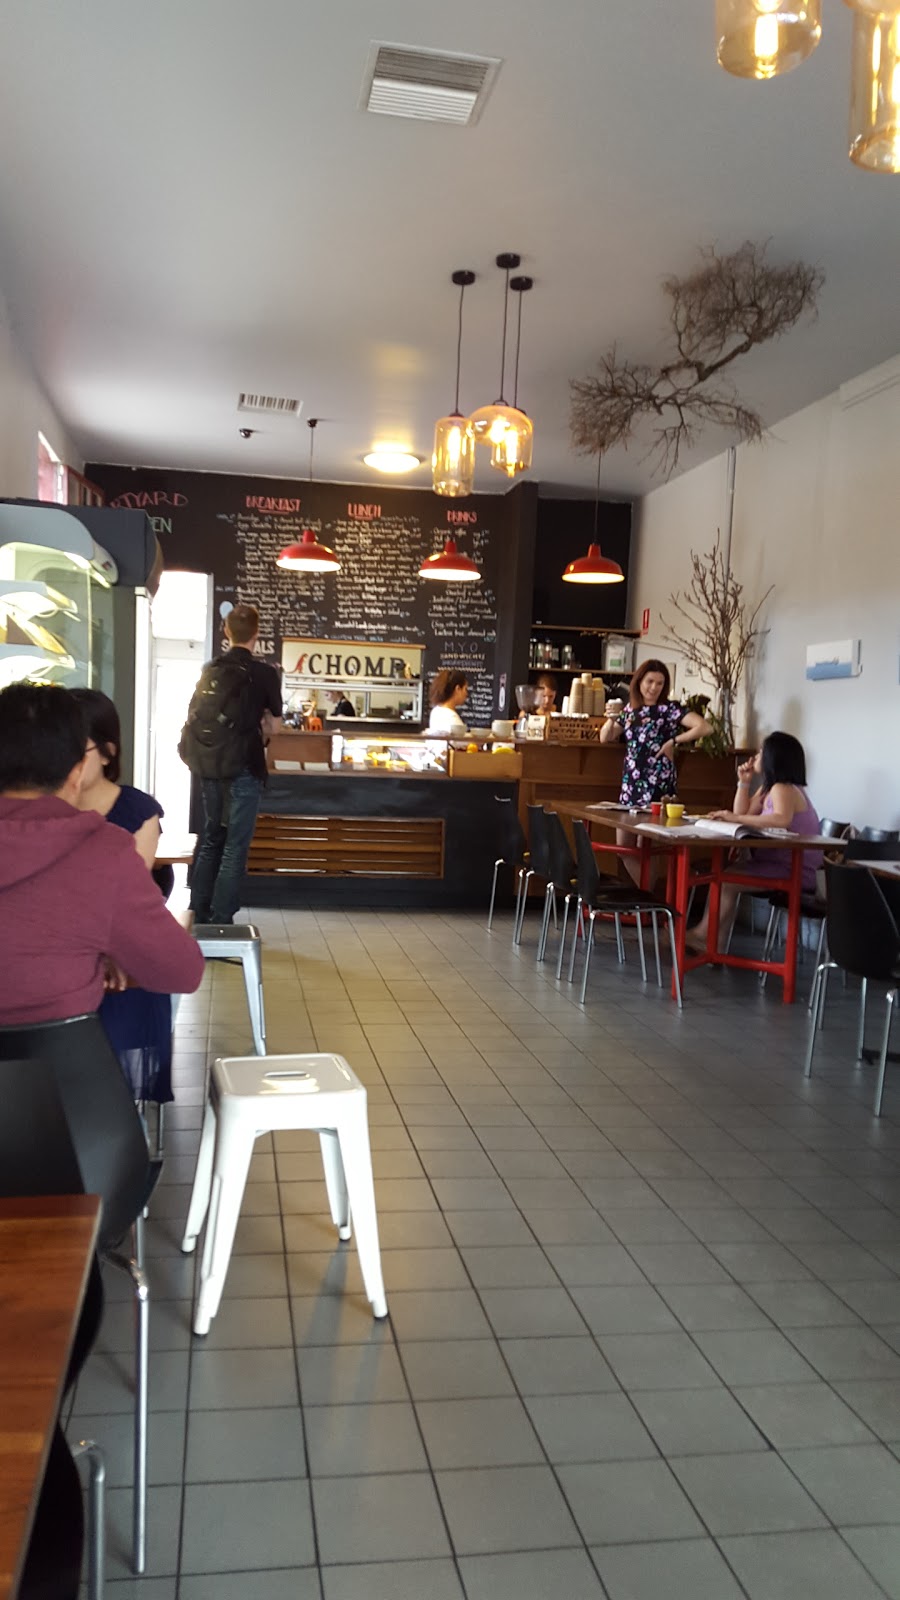 Chomp Cafe Abbotsford Melboune | cafe | 1 Trenerry Cres, Abbotsford VIC 3067, Australia | 0394860824 OR +61 3 9486 0824